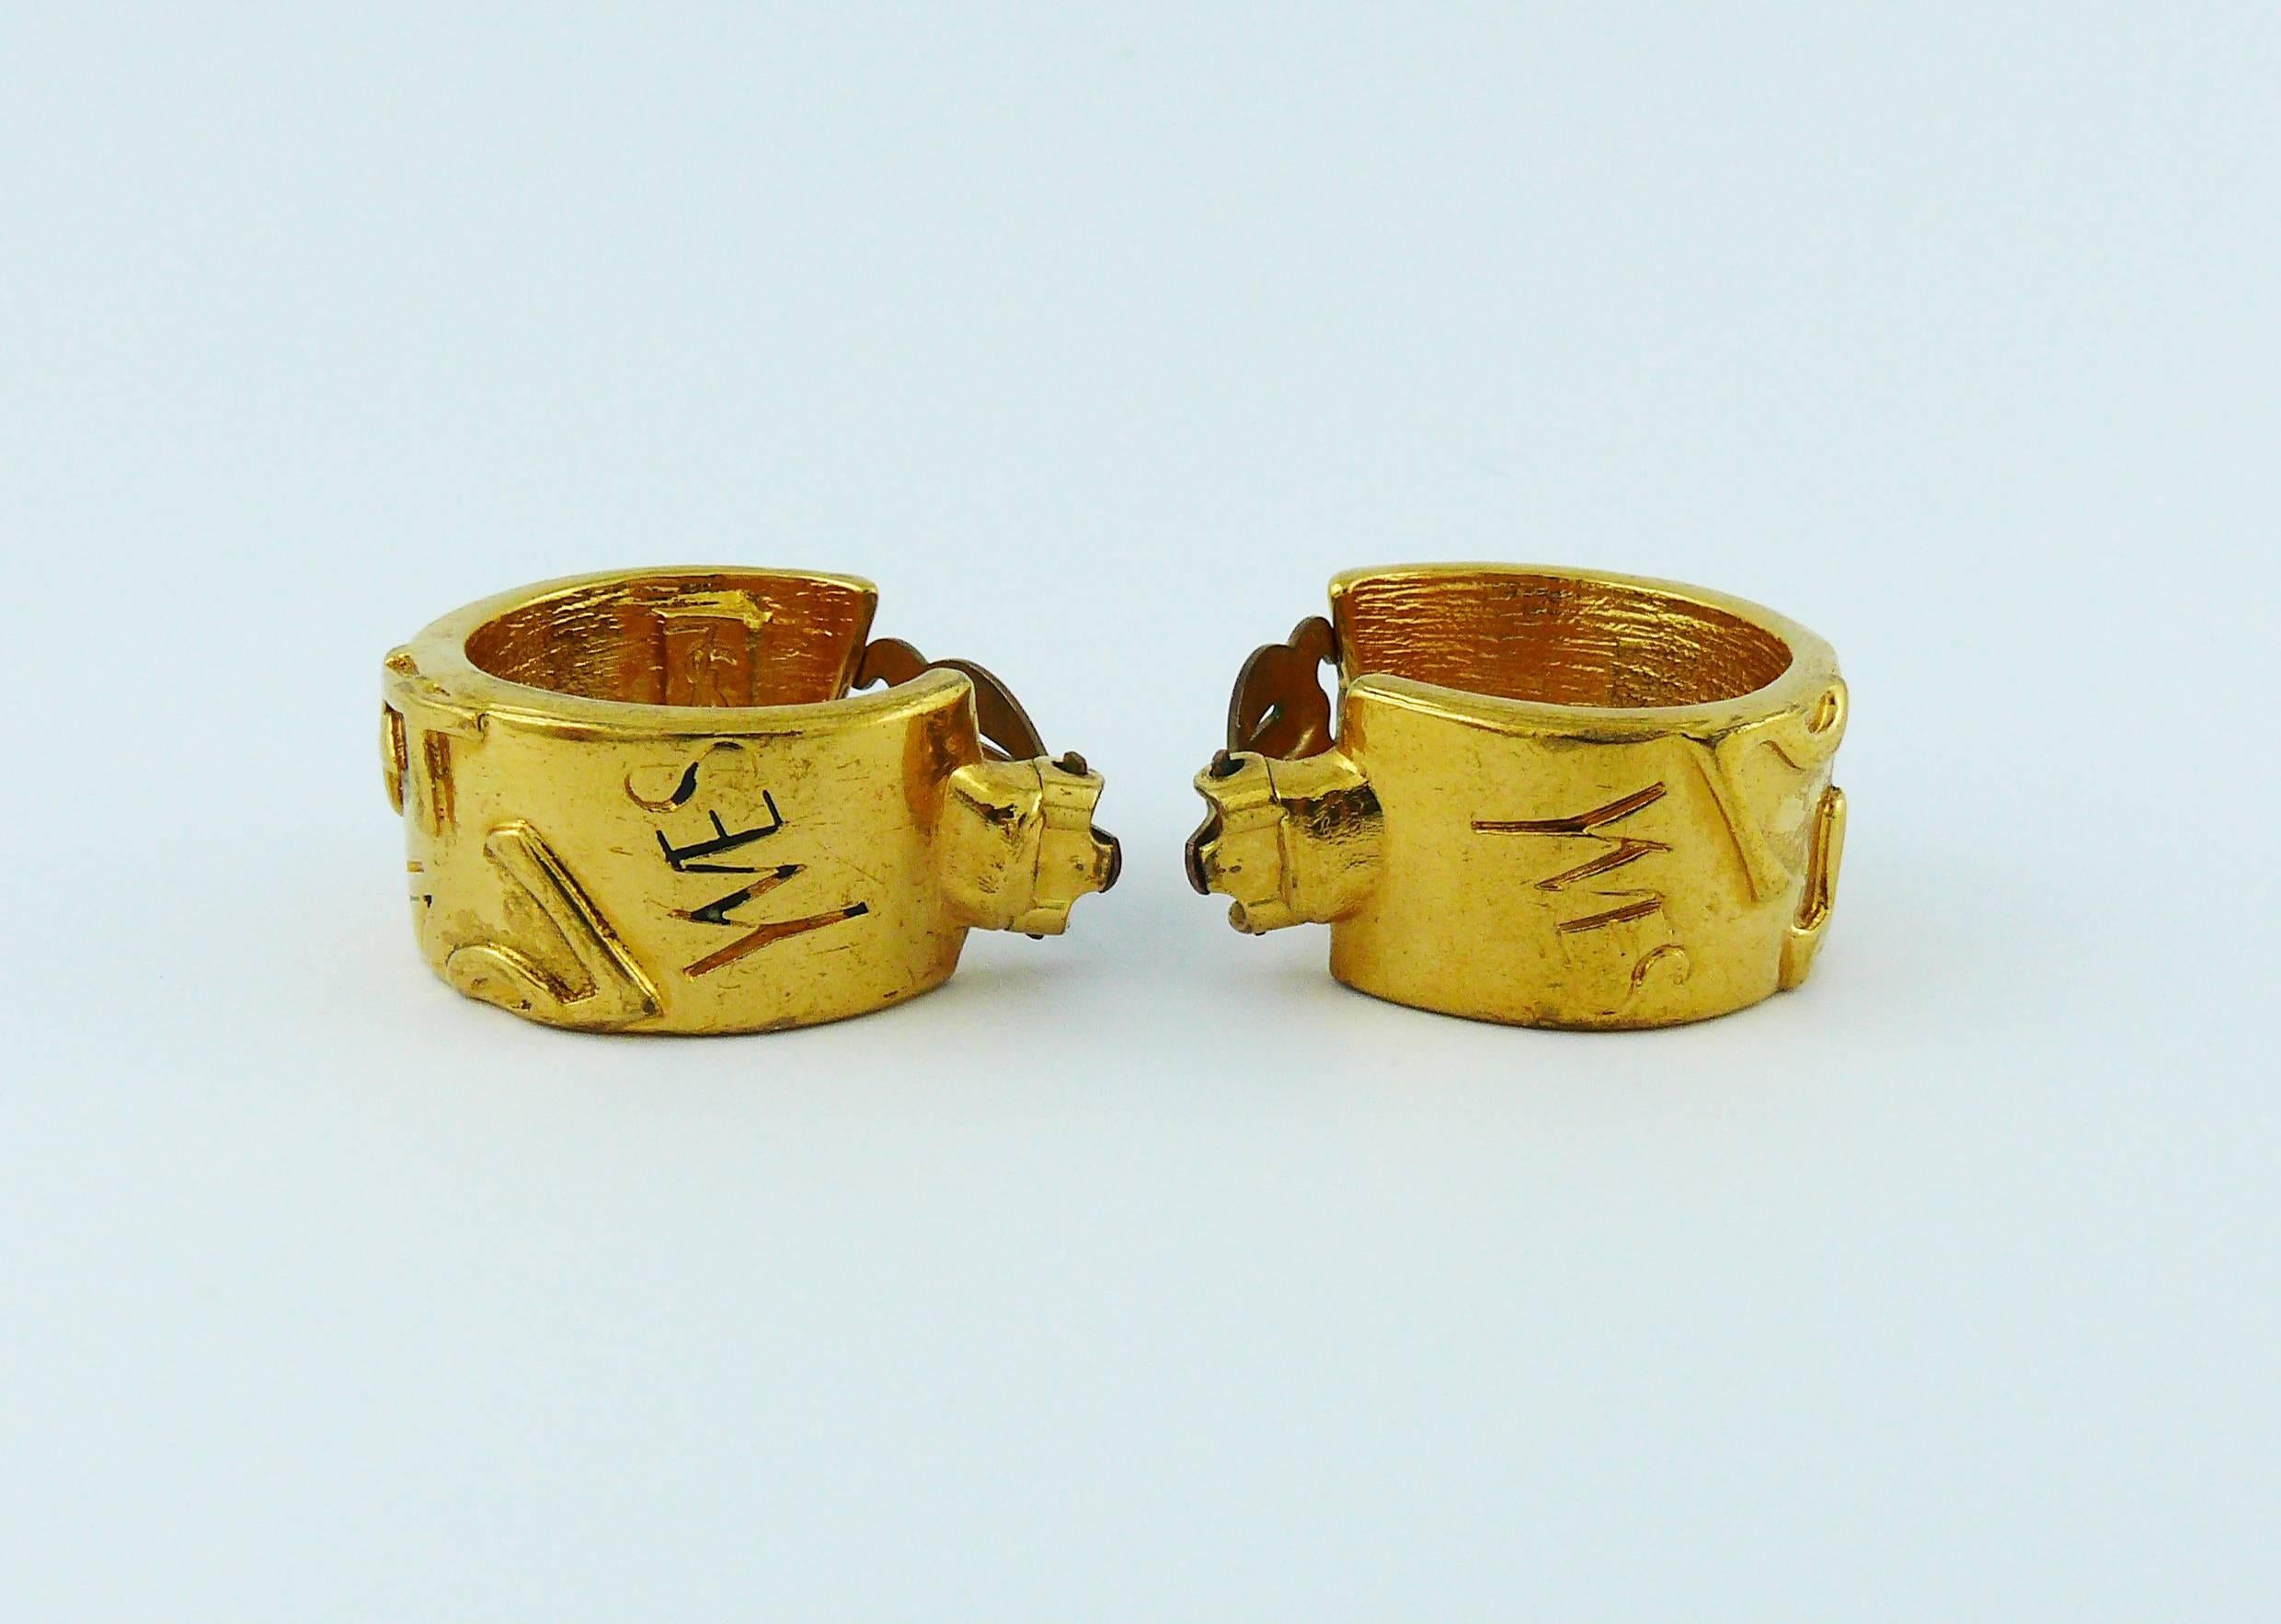 Yves Saint Laurent YSL Vintage Iconic Signature Hoop Earrings In Excellent Condition For Sale In Nice, FR